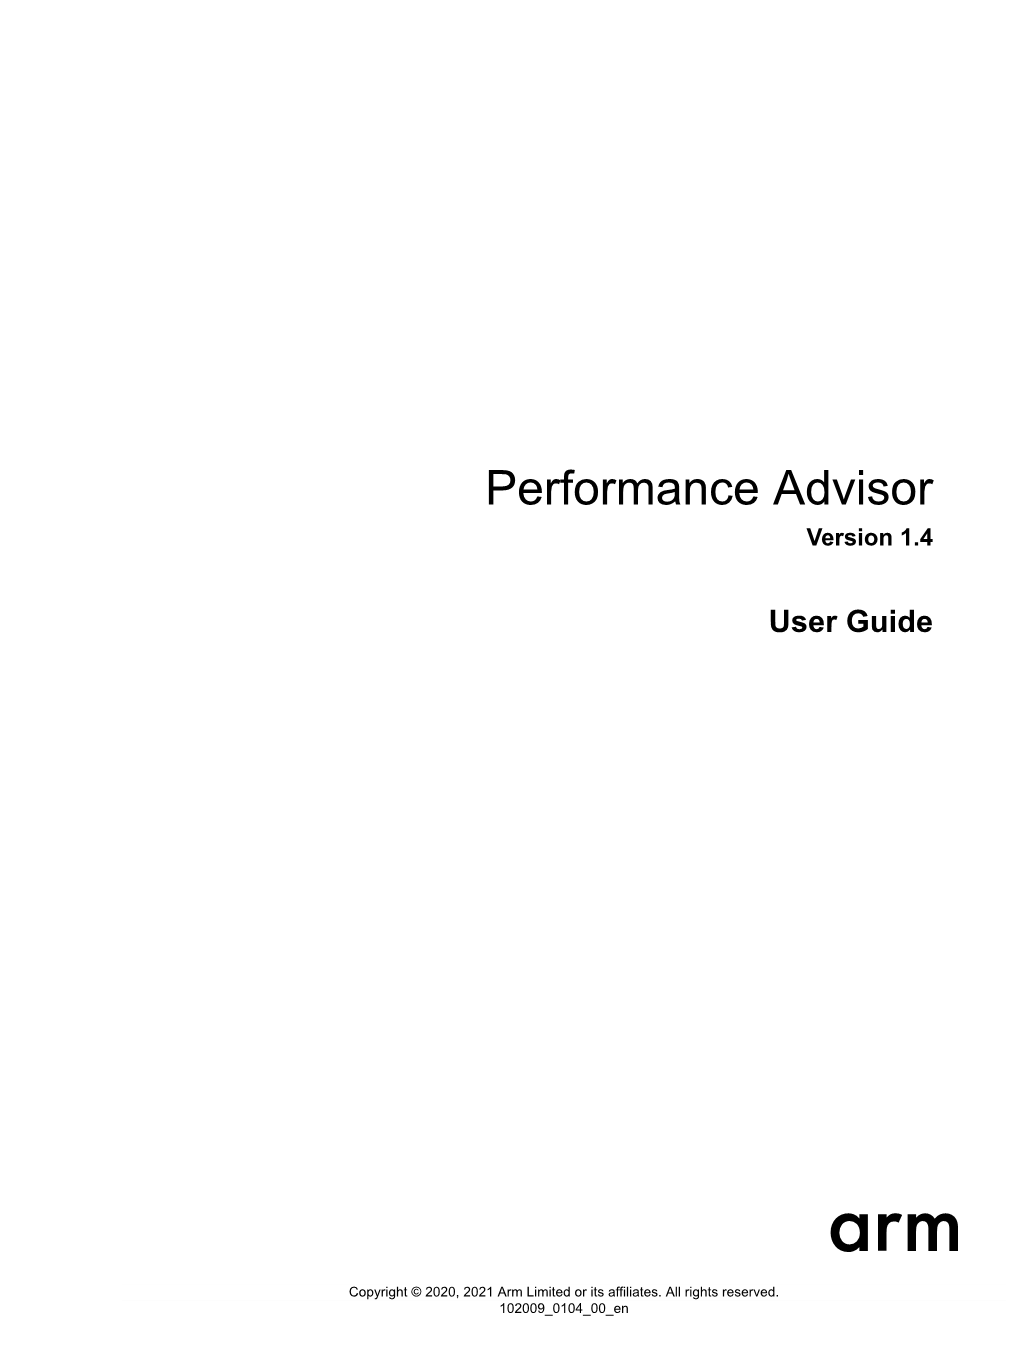 Performance Advisor User Guide Copyright © 2020, 2021 Arm Limited Or Its Affiliates